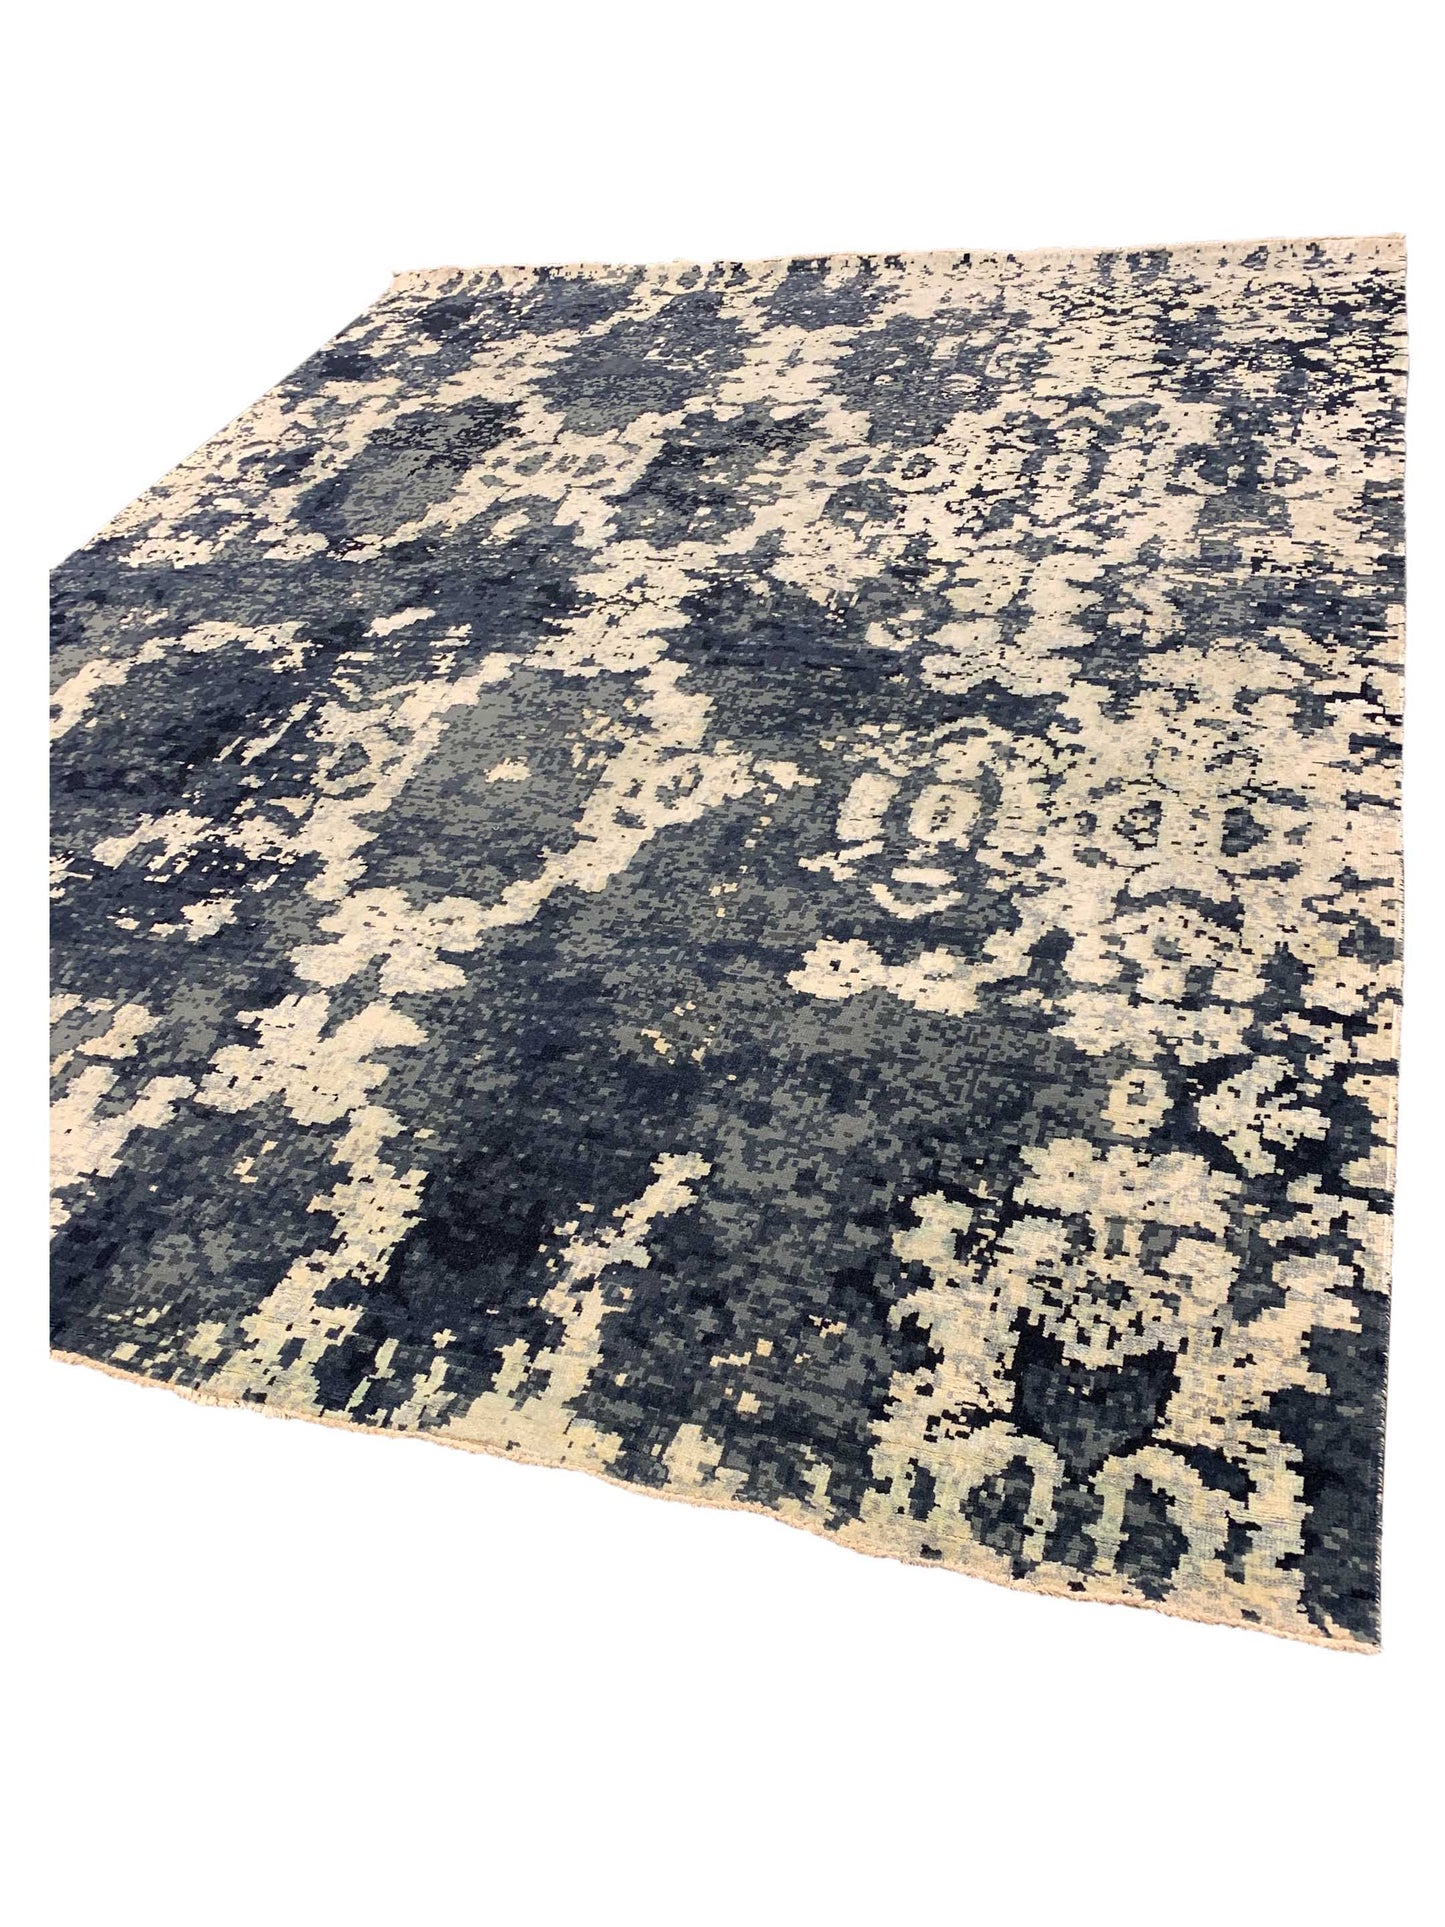 Artisan Reese  Down River  Transitional Knotted Rug